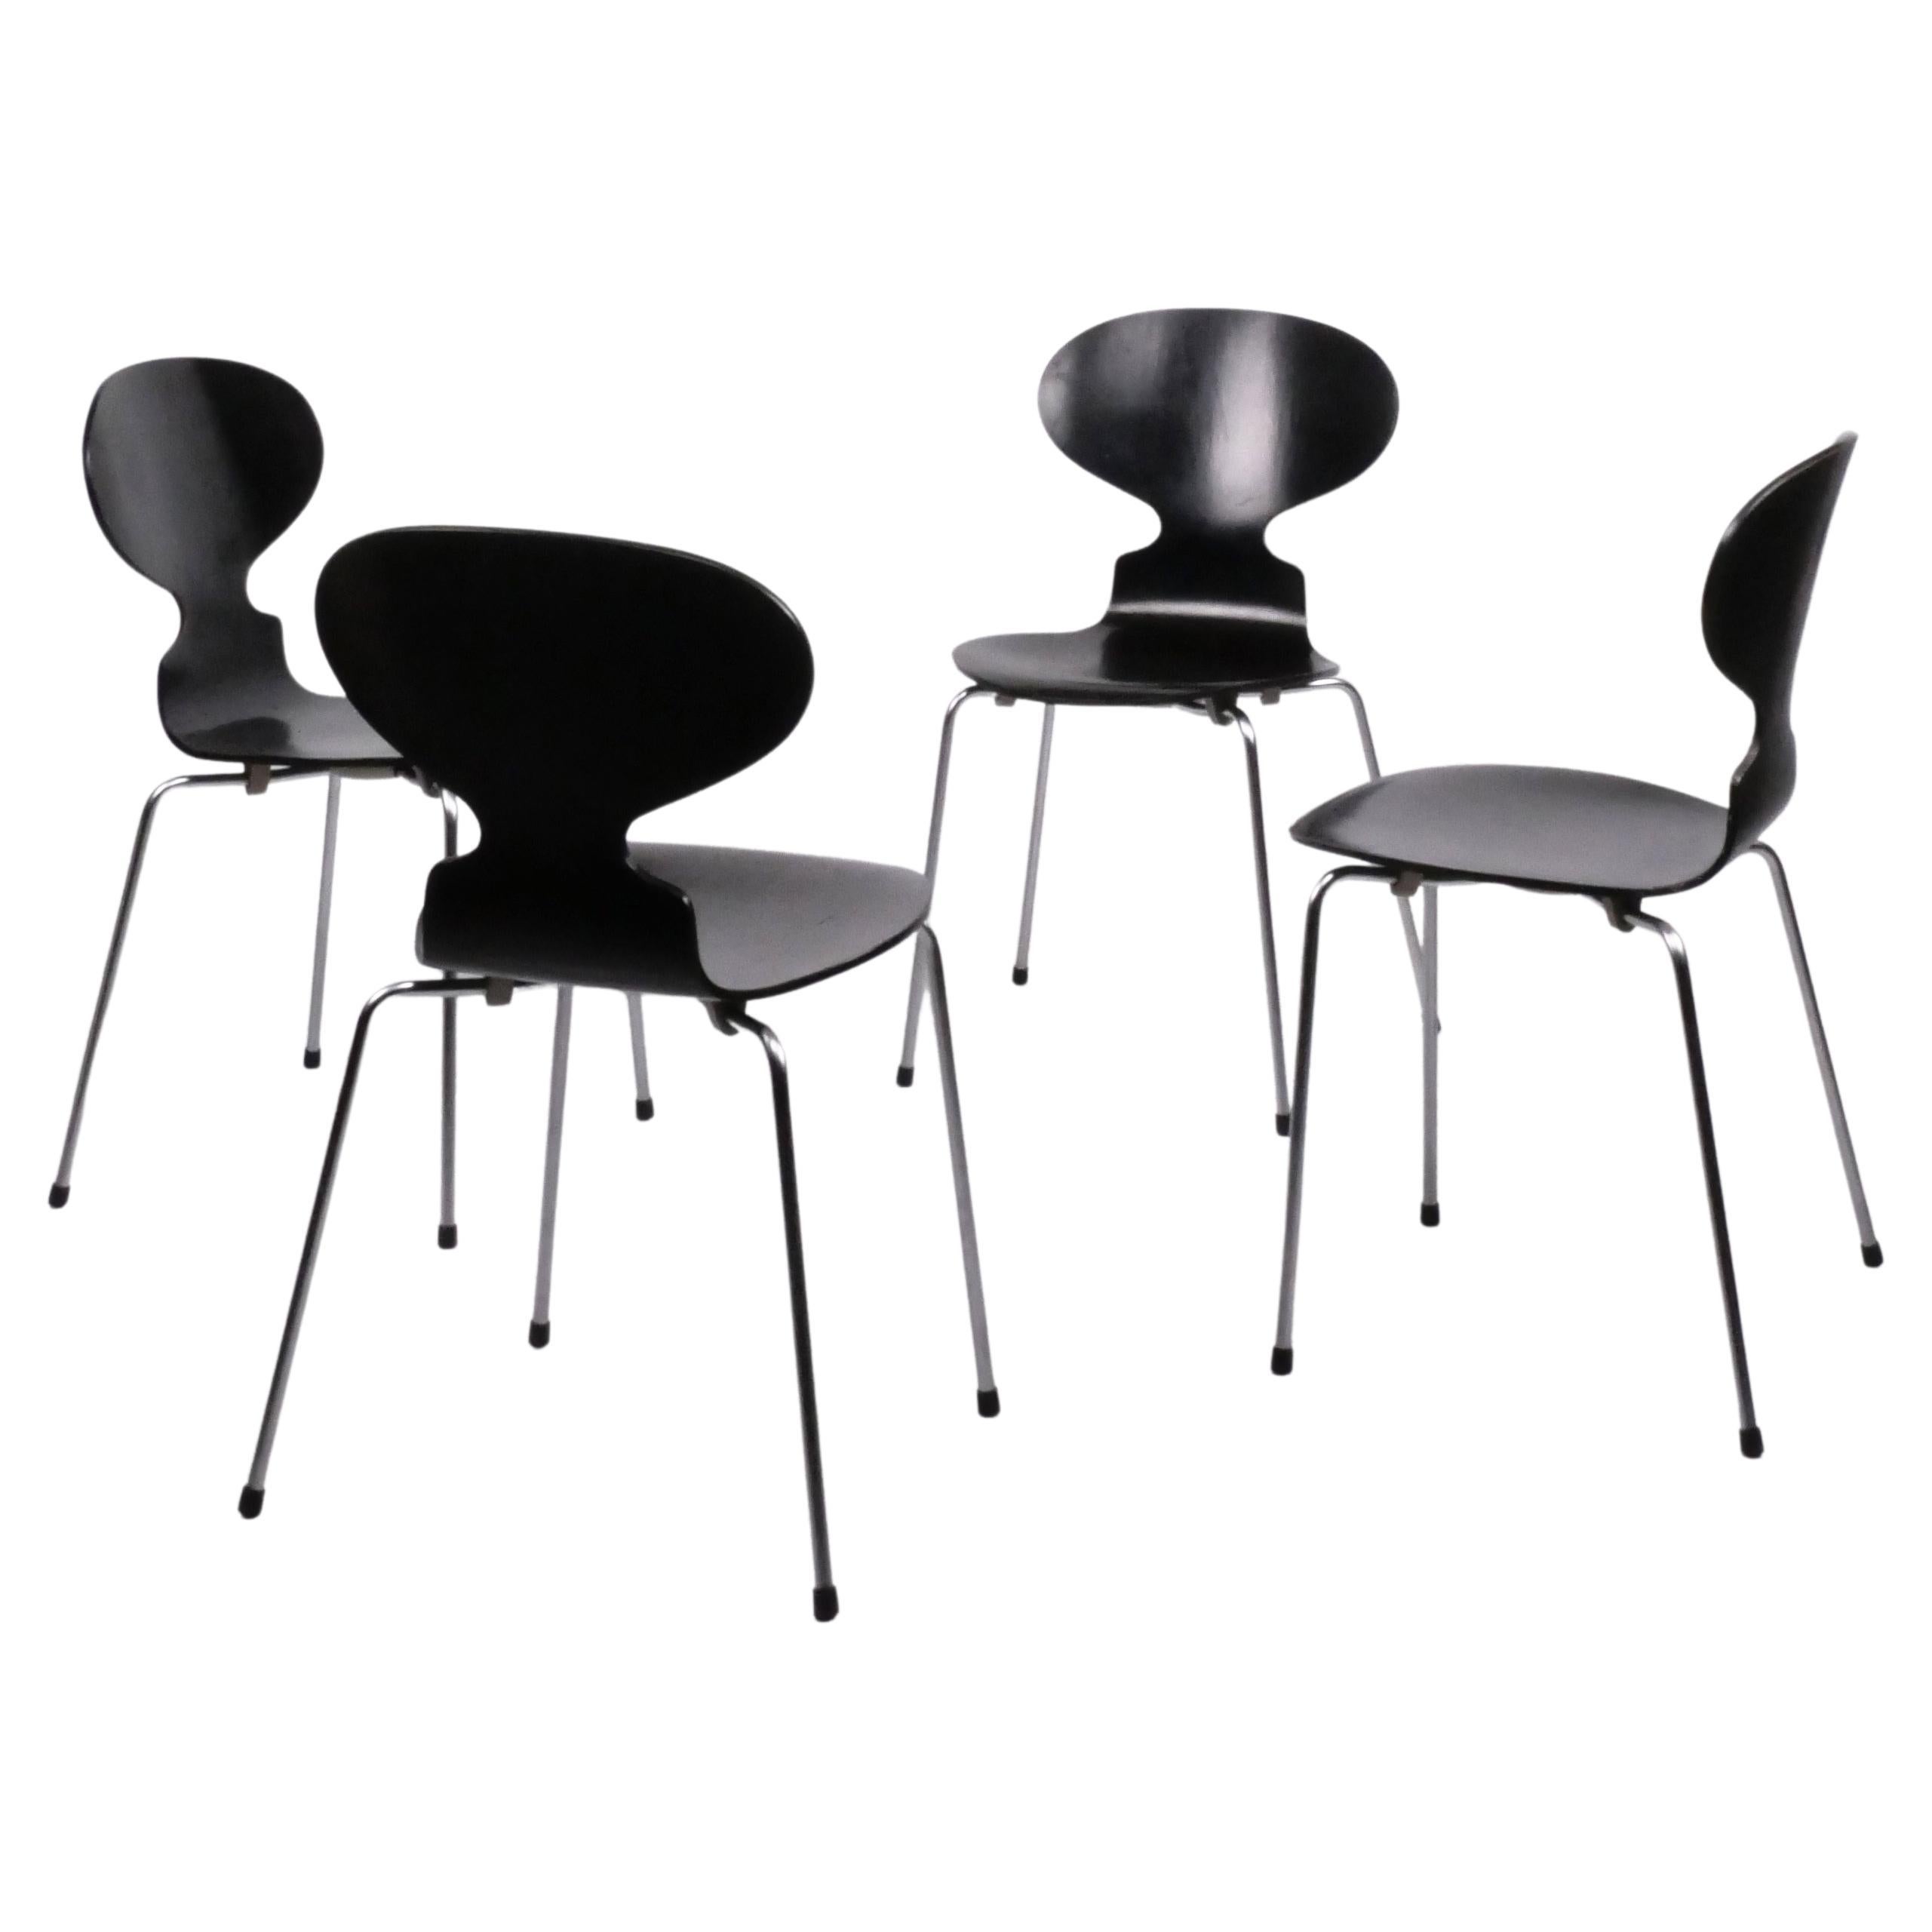 Set of 4 ‘Ant’ Chairs by Arne Jacobsen for Fritz Hansen, Good Early Production